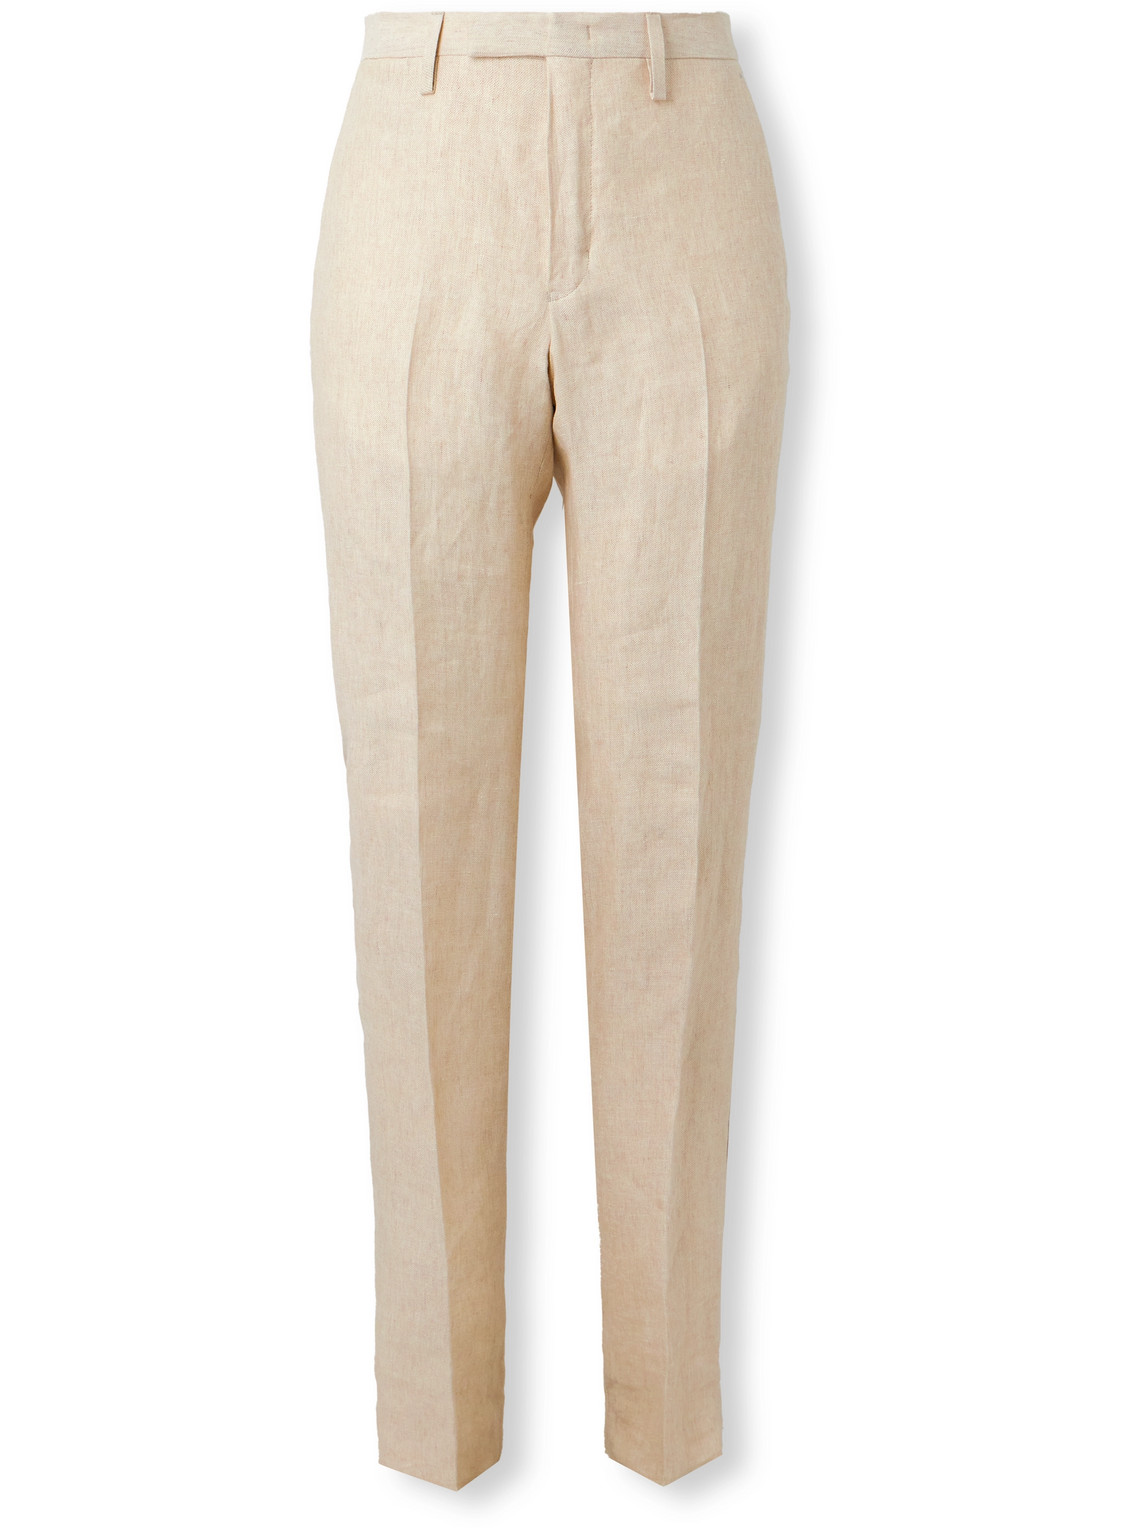 Phillip Tapered Linen Suit Trousers